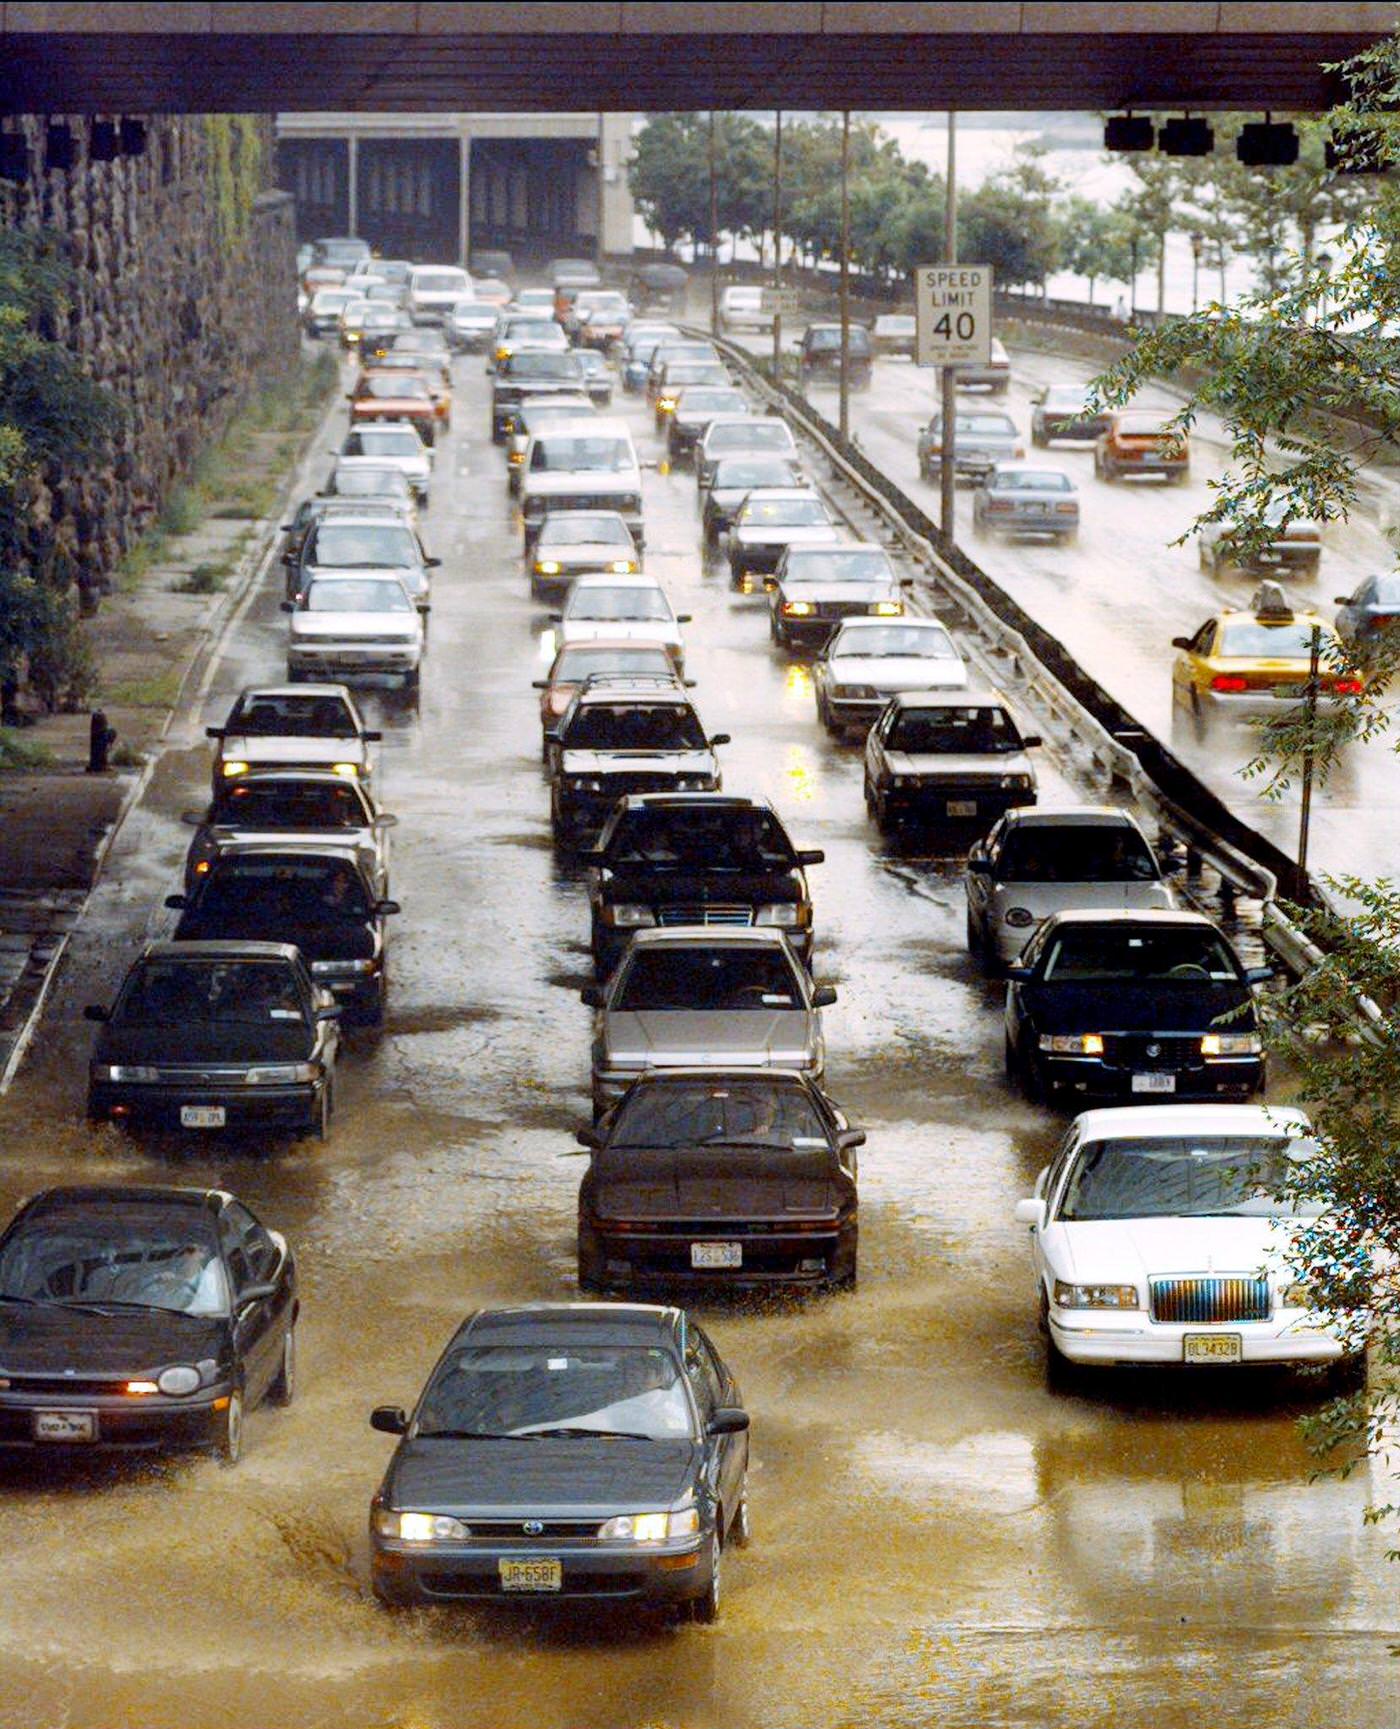 Cars Drive Through Flooded Street On Fdr Dr. At York Ave. And 68Th St., Manhattan, 1995